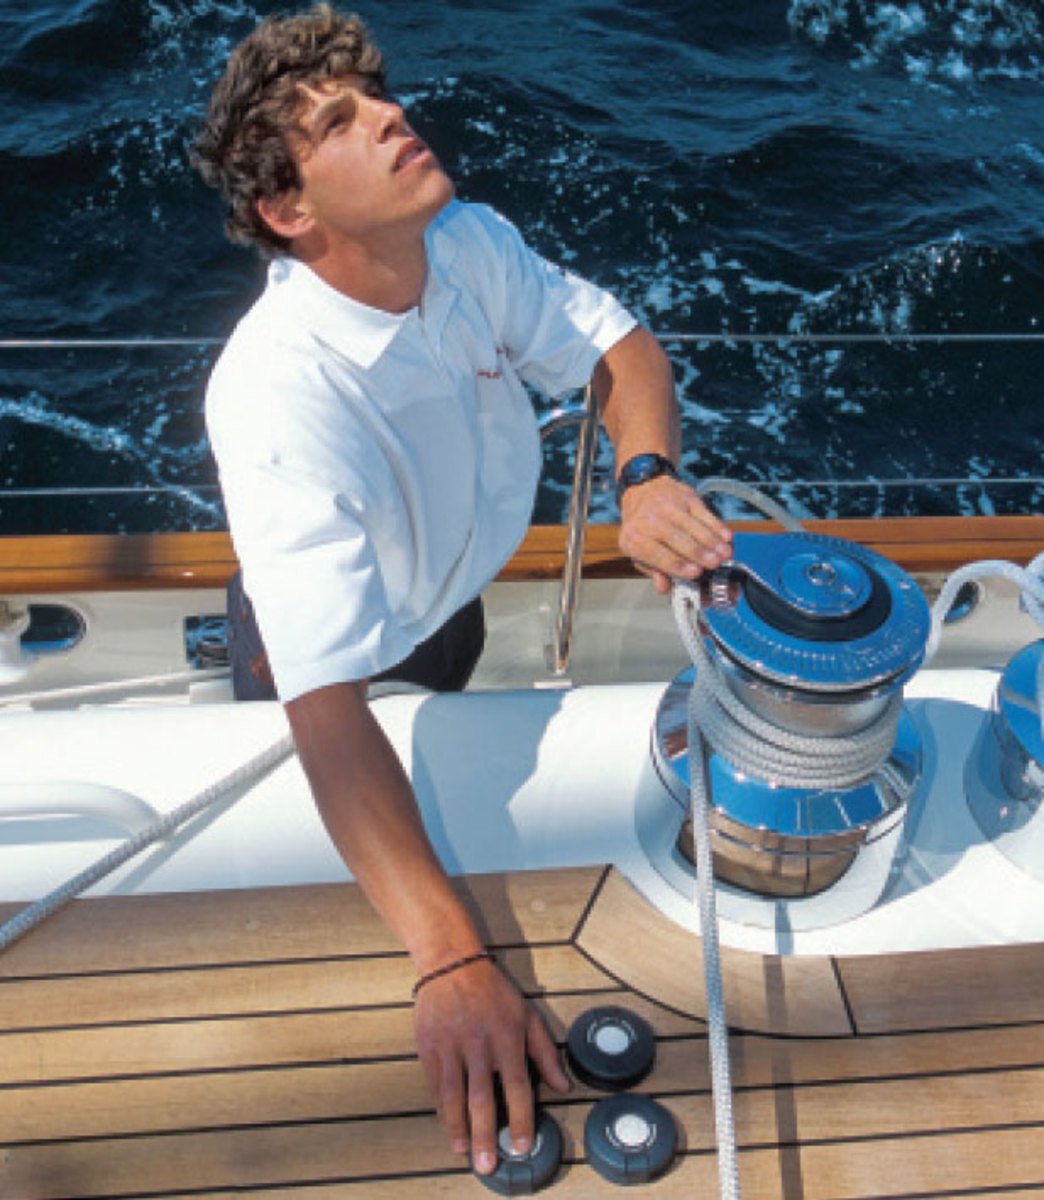 Powered winches fine-tune sail shape without straining muscles